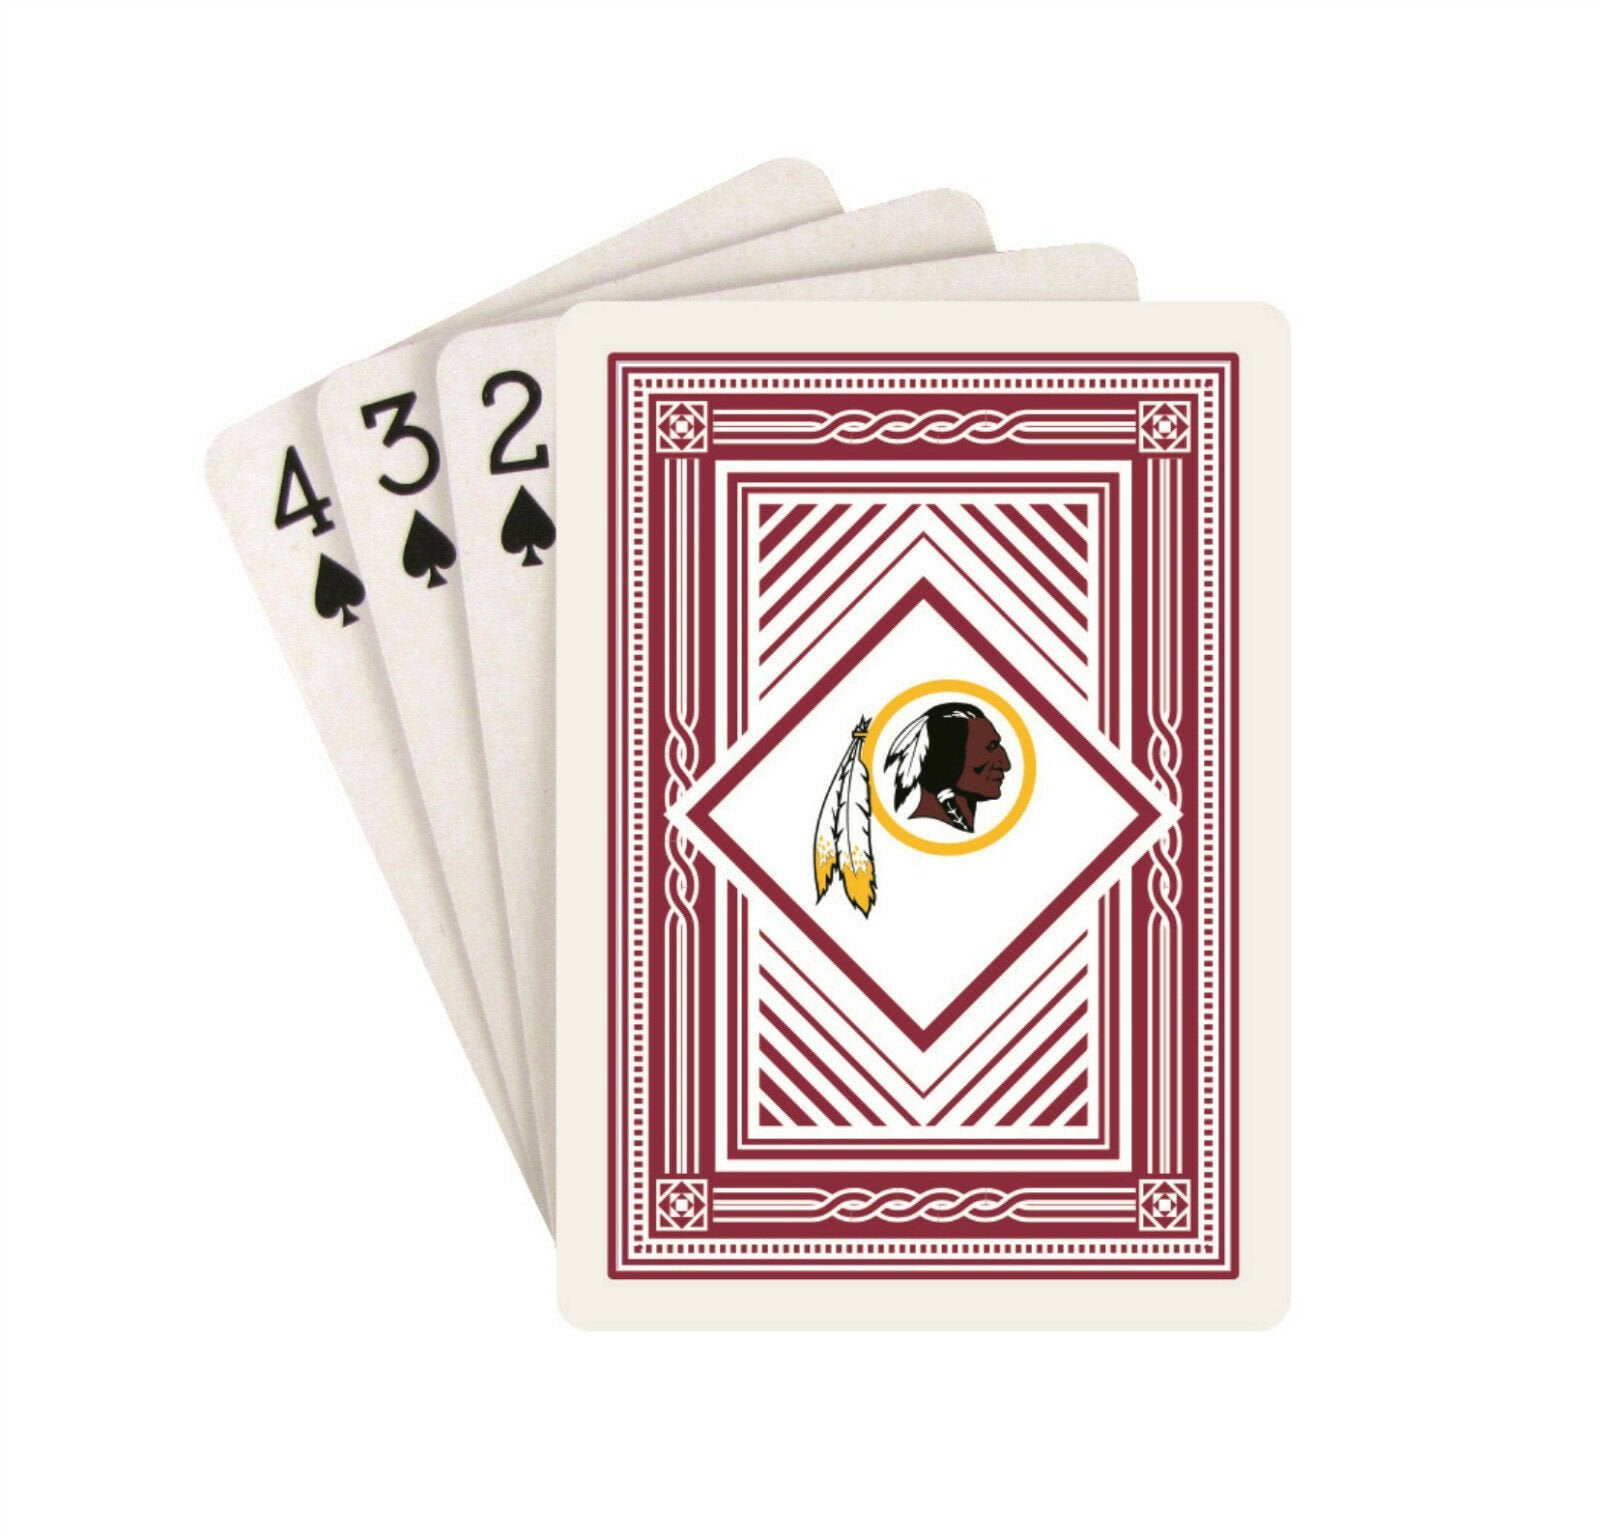 Washington Redskins Classic Logo Style Deck of Playing Cards NFL Football